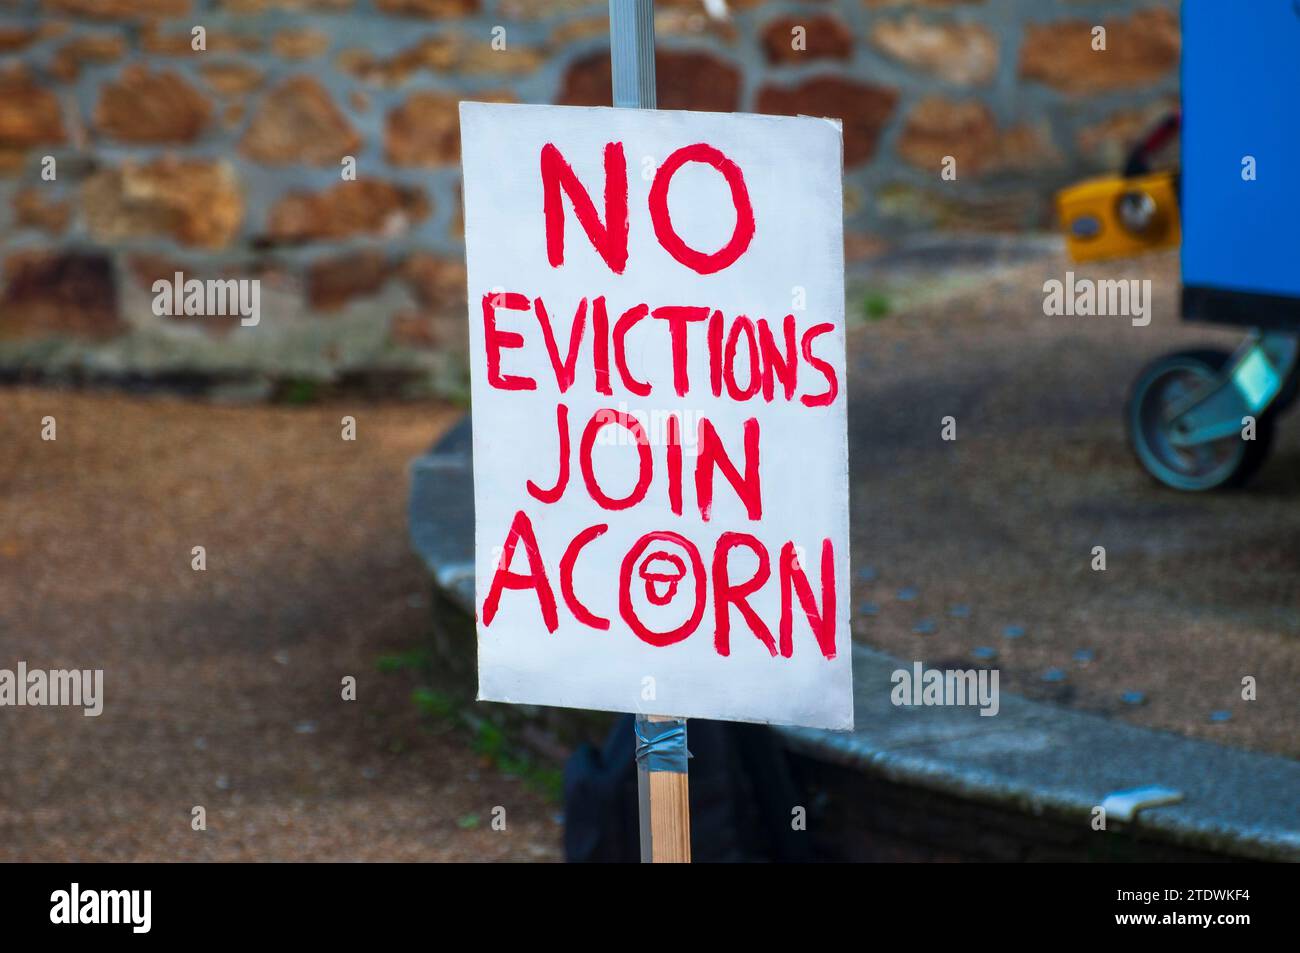 Housing Protest in Newquay Cornwall. Stock Photo